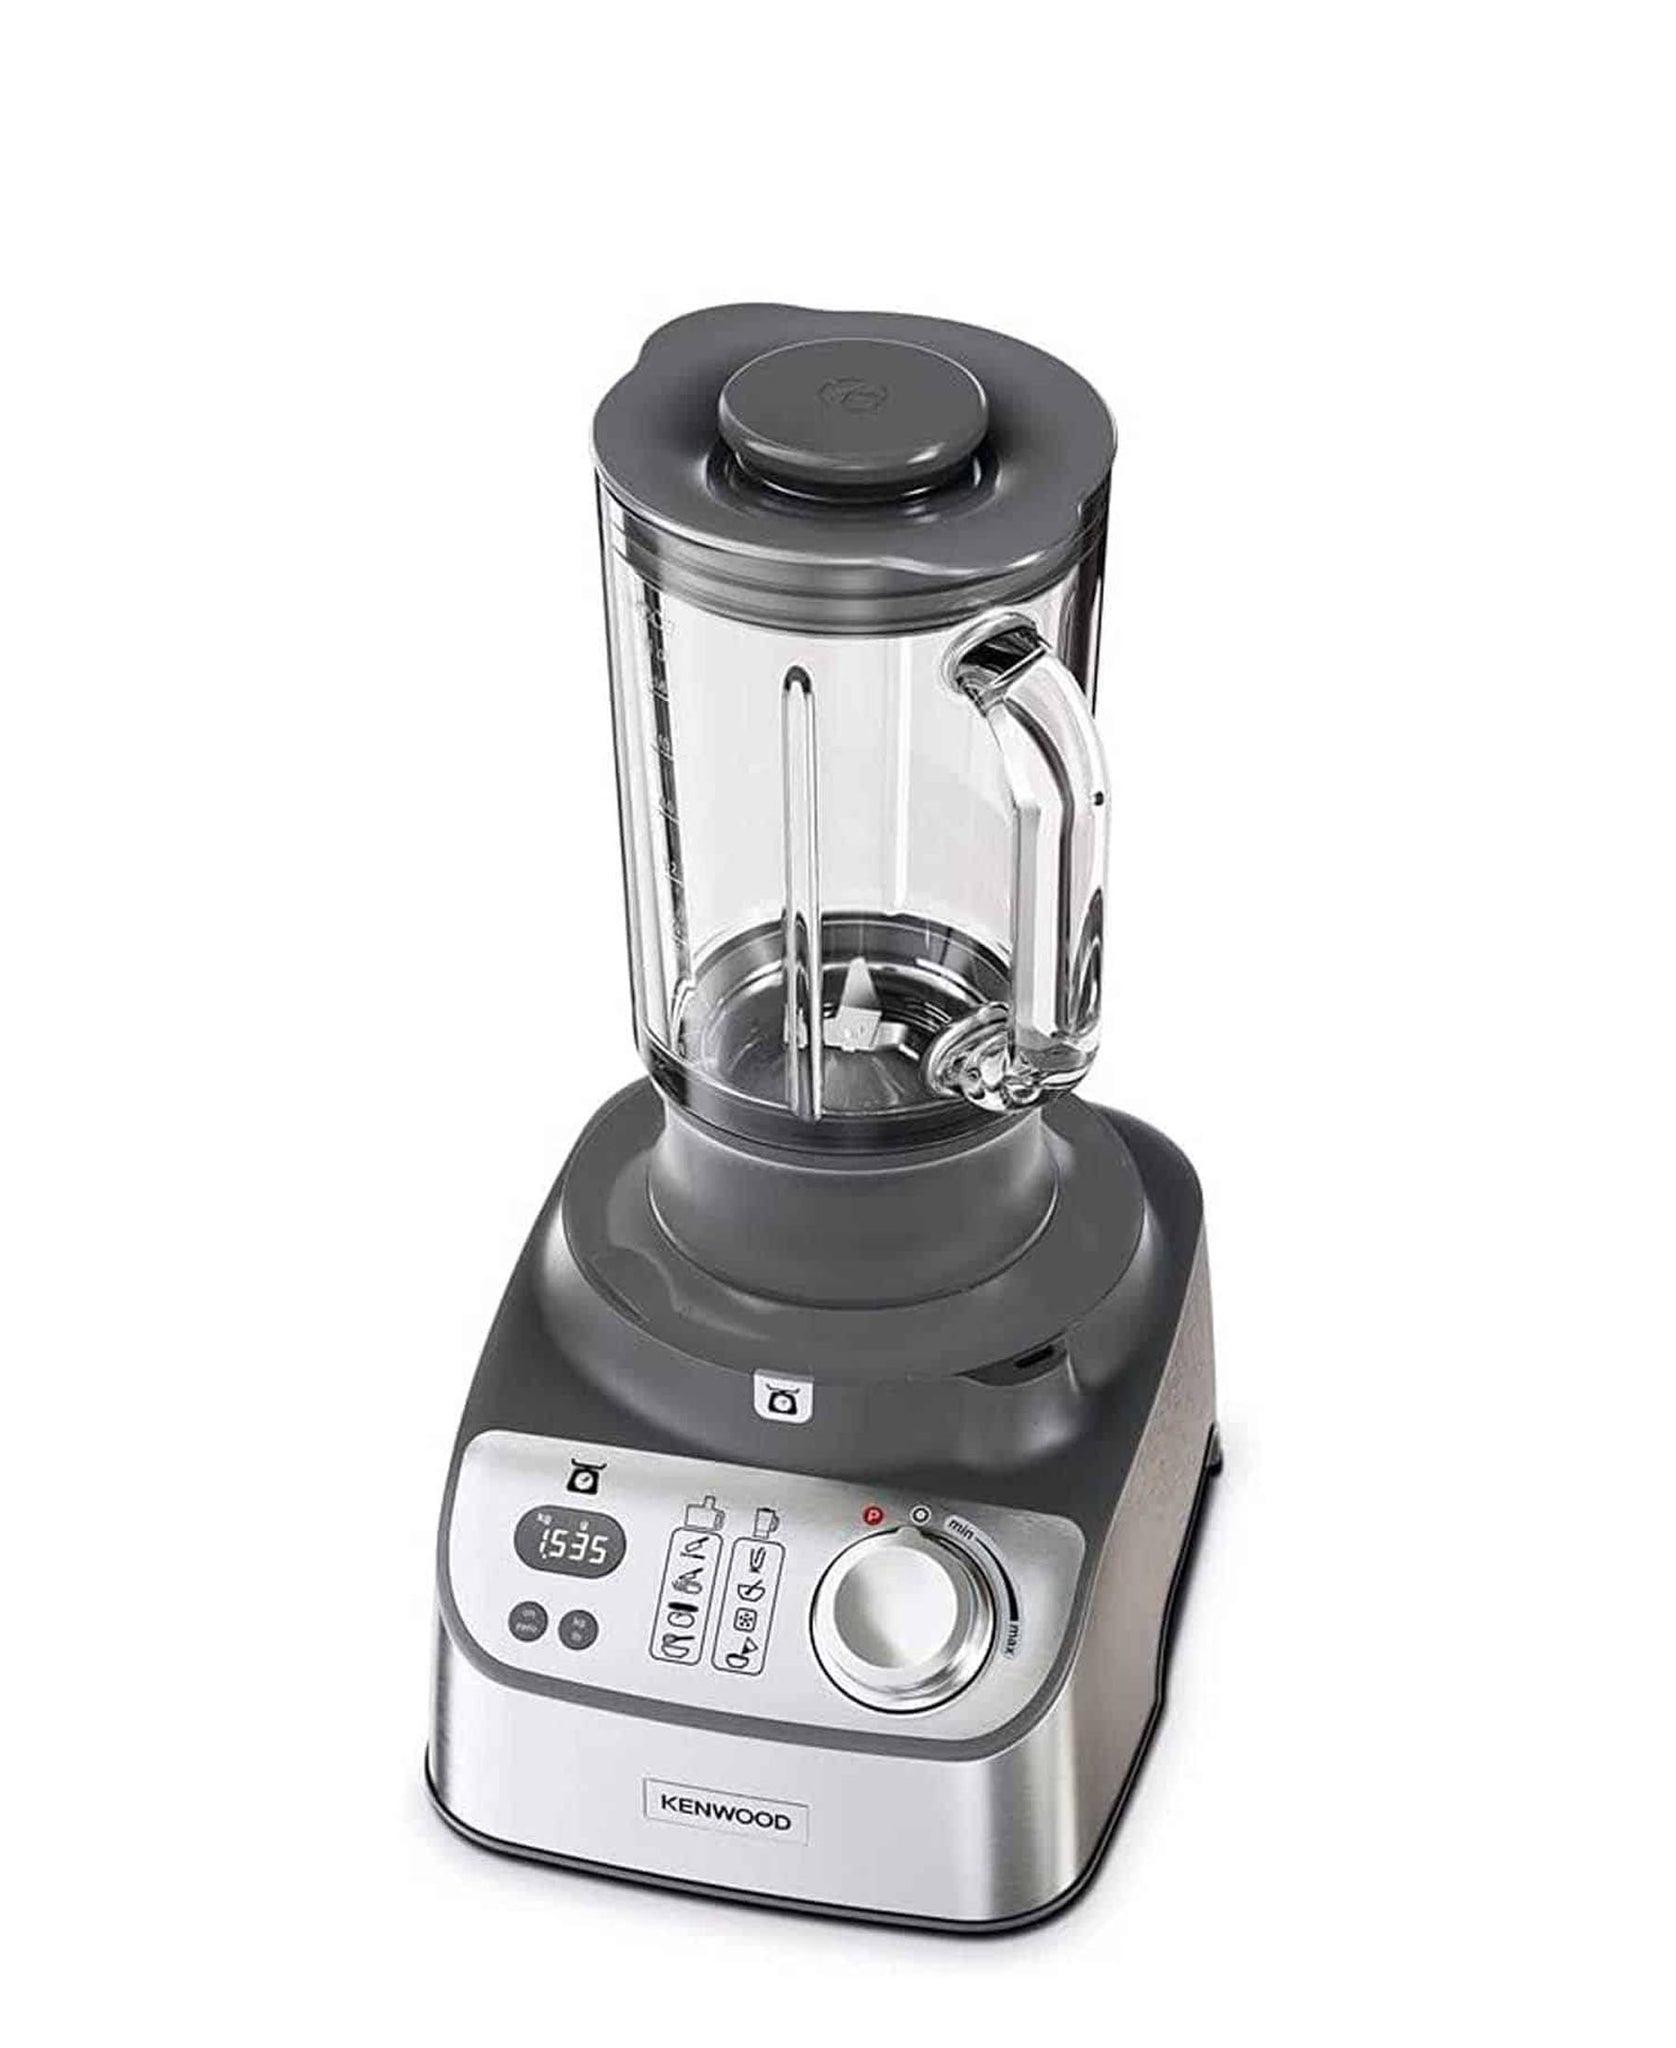 Kenwood Multipro Express Weigh 3L Food Processor - Silver